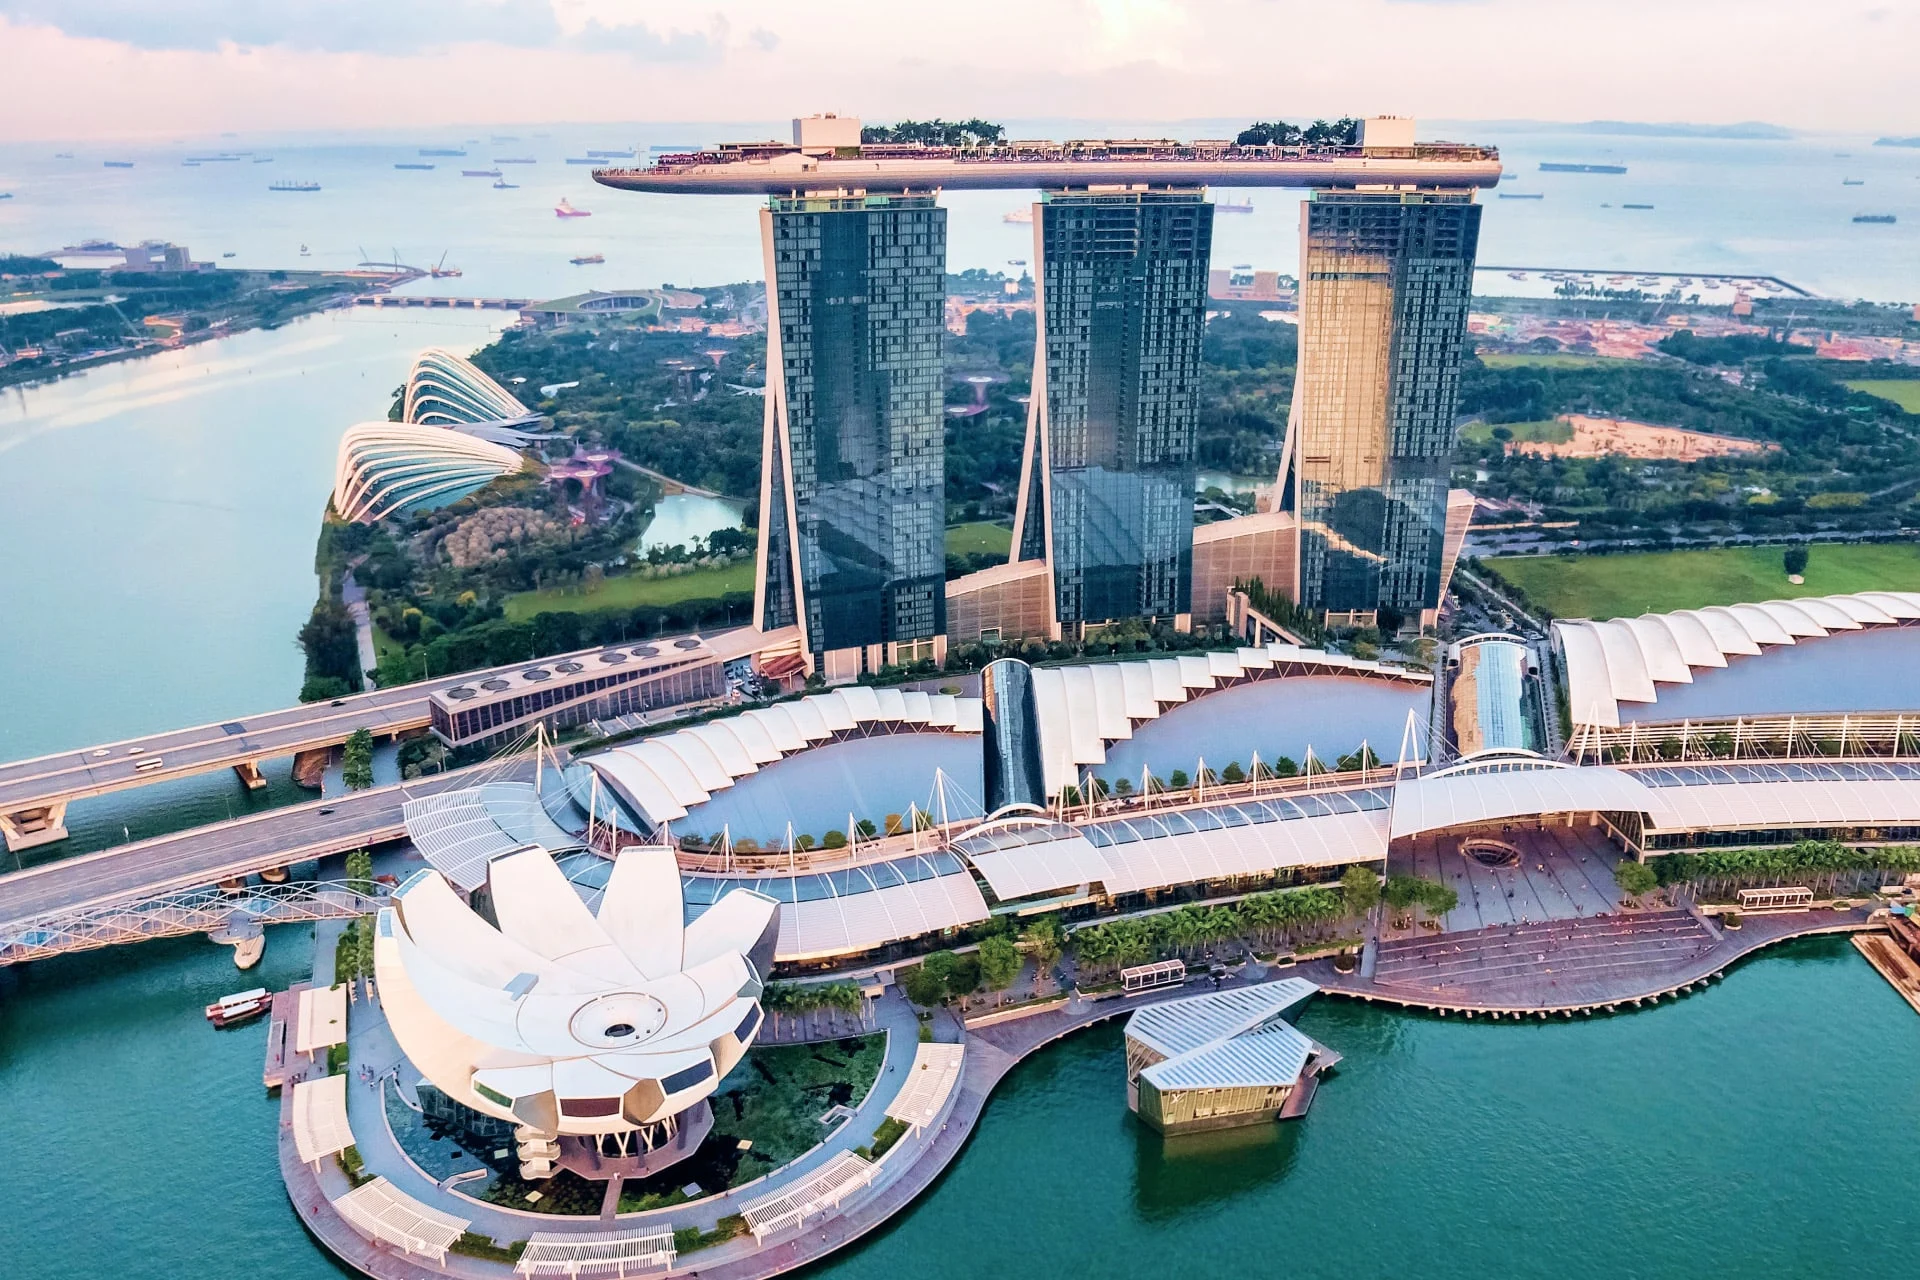 An aerial view of the marina bay sands hotel in singapore.